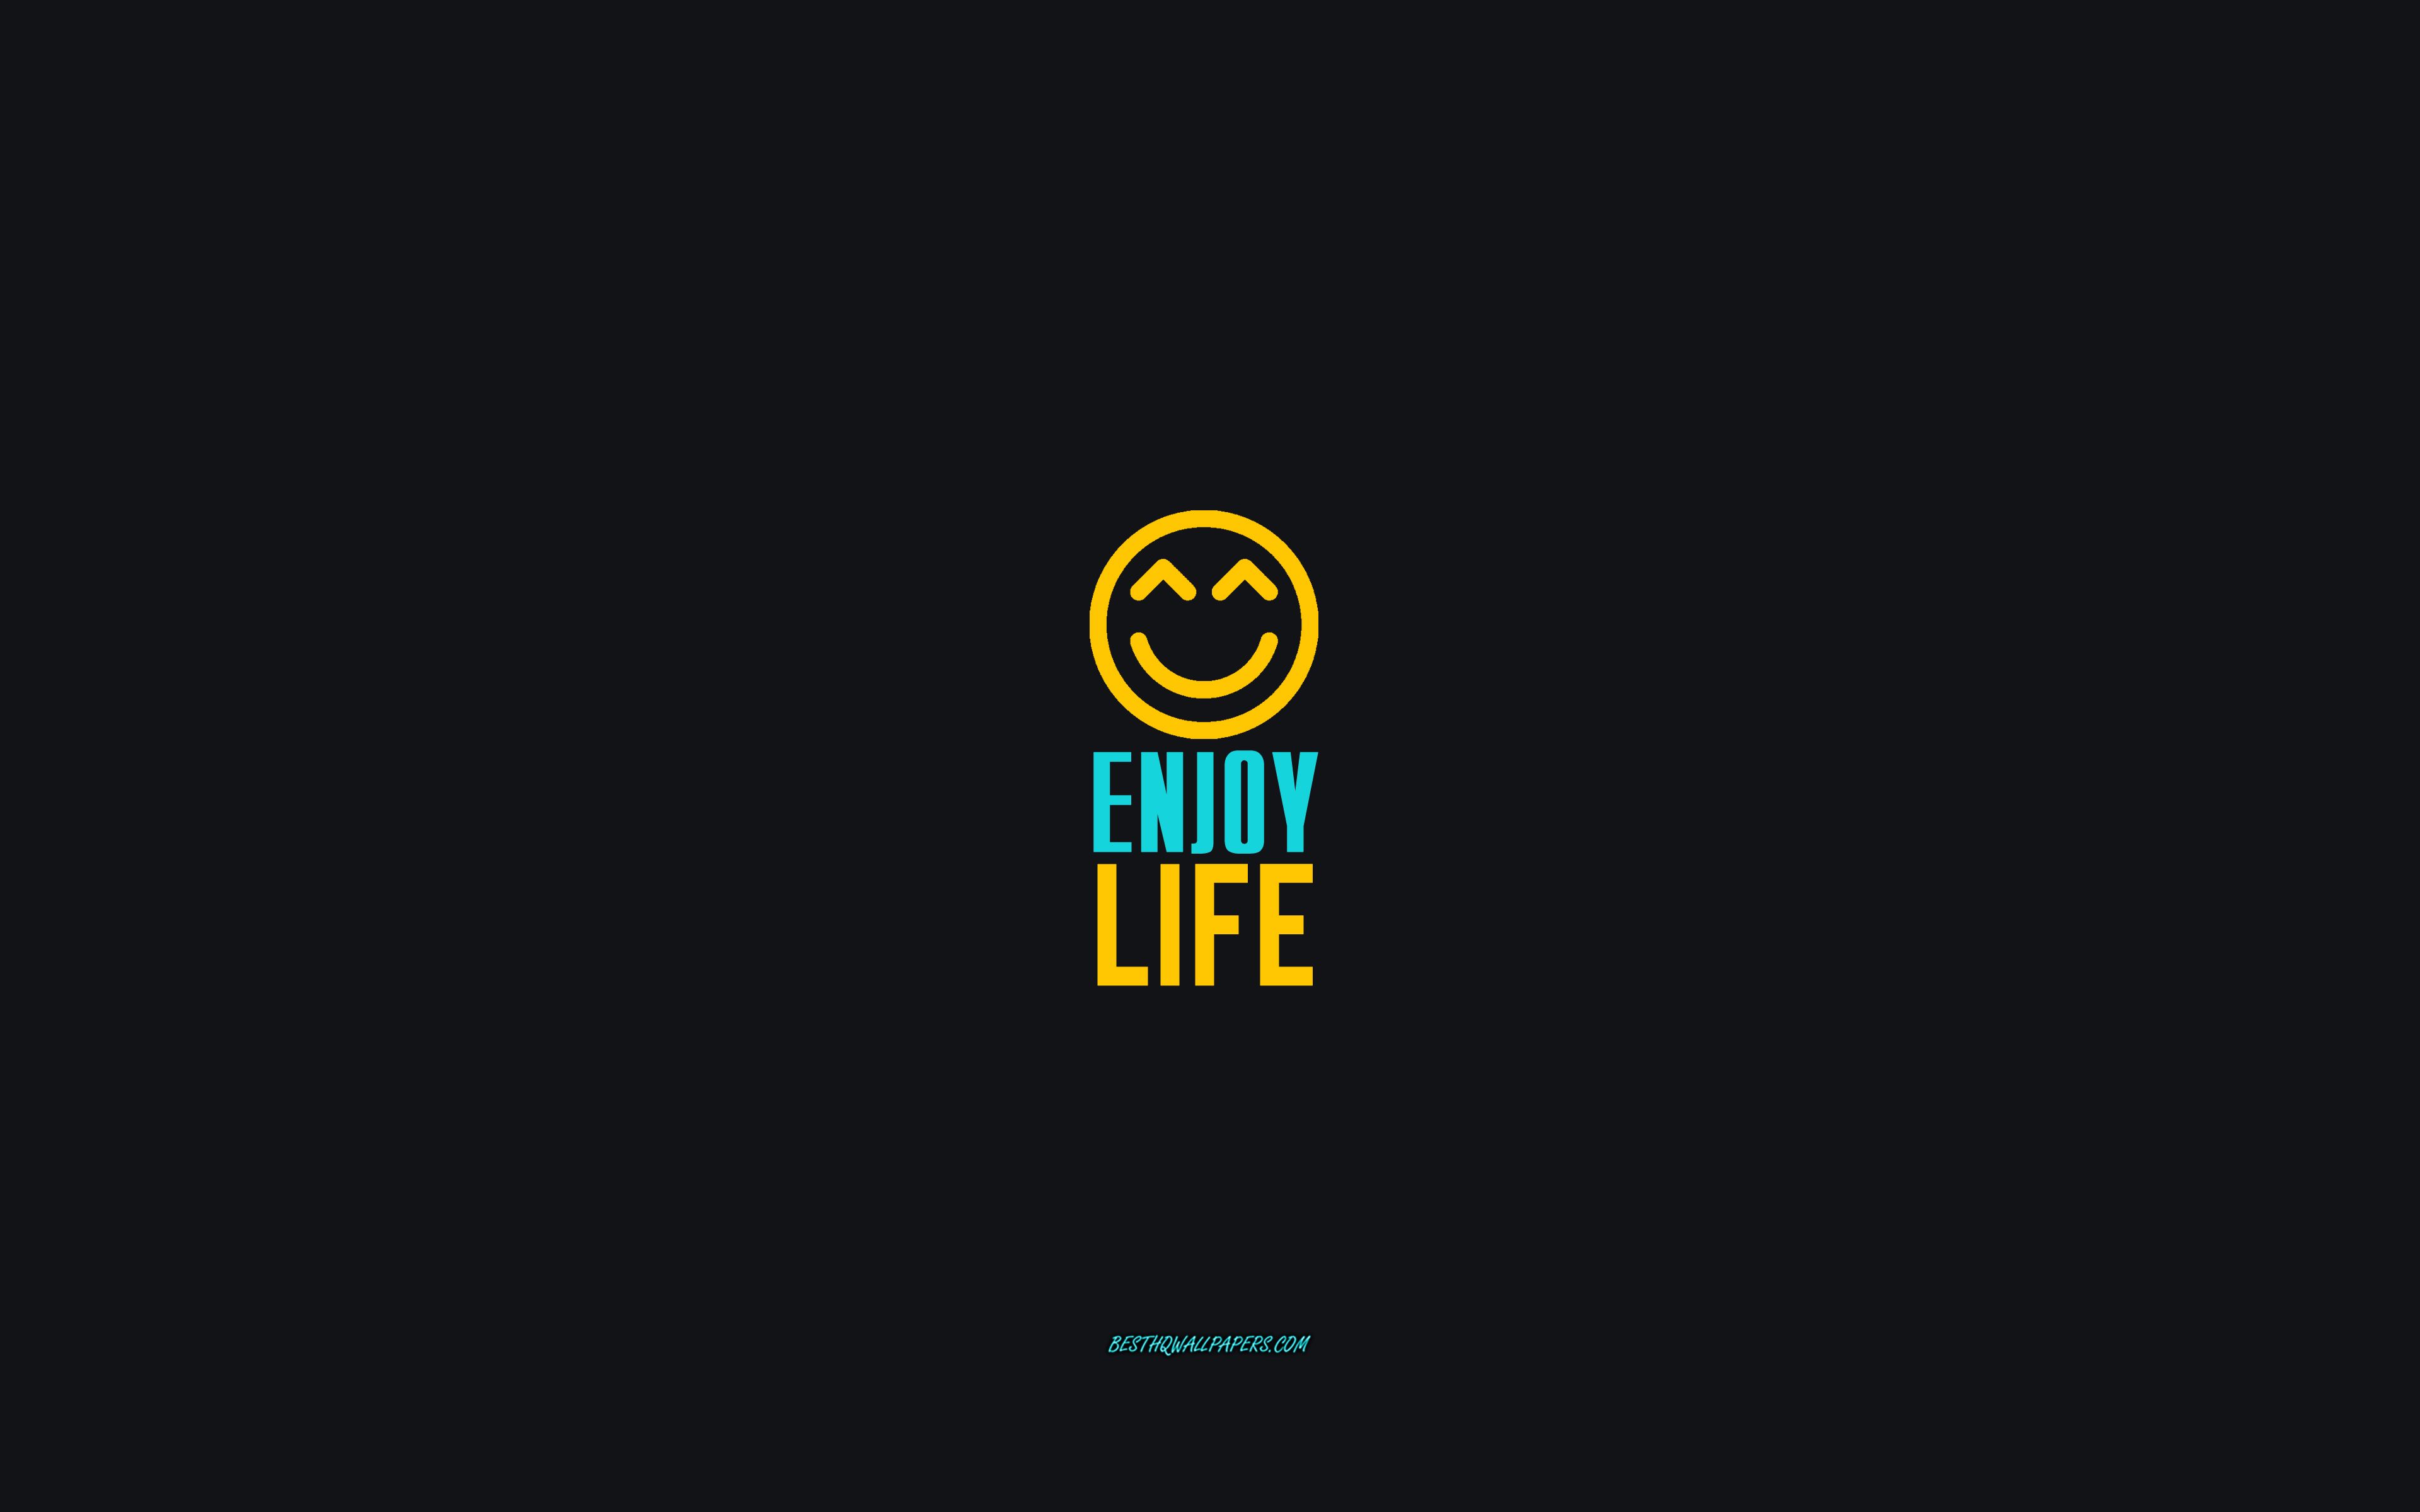 Download wallpaper Enjoy life, gray background, smiley icon, motivation, inspiration, Enjoy life concepts for desktop with resolution 3840x2400. High Quality HD picture wallpaper